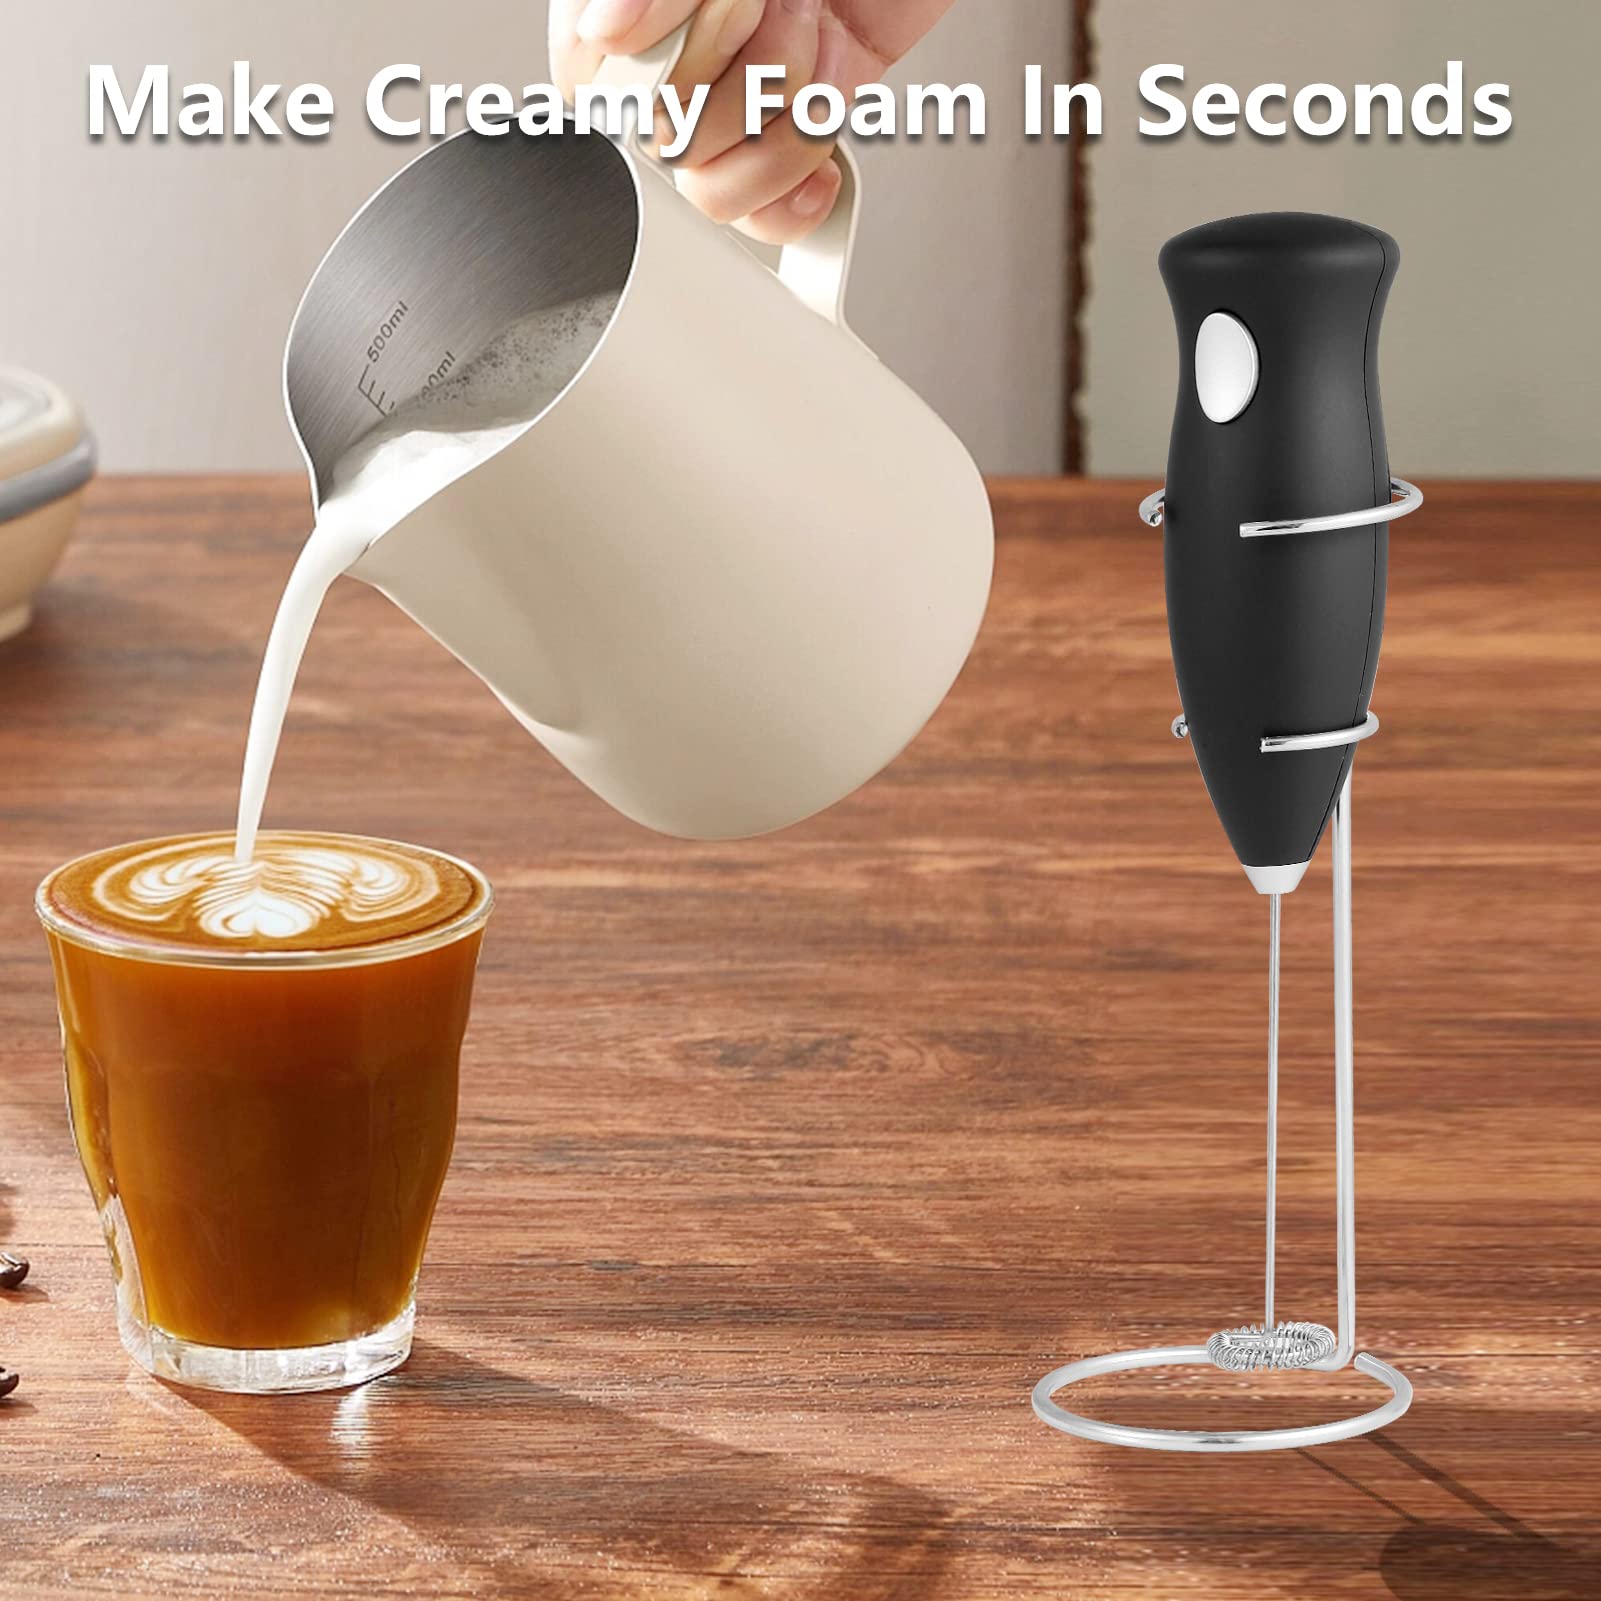 Milk Frother Handheld Coffee Mixer - Battery Operated Electric Foam Maker with Stainless Steel Stand, Portable Electric Frother for Coffee, Cappuccino, Latte, Matcha, Hot Chocolate (Black)